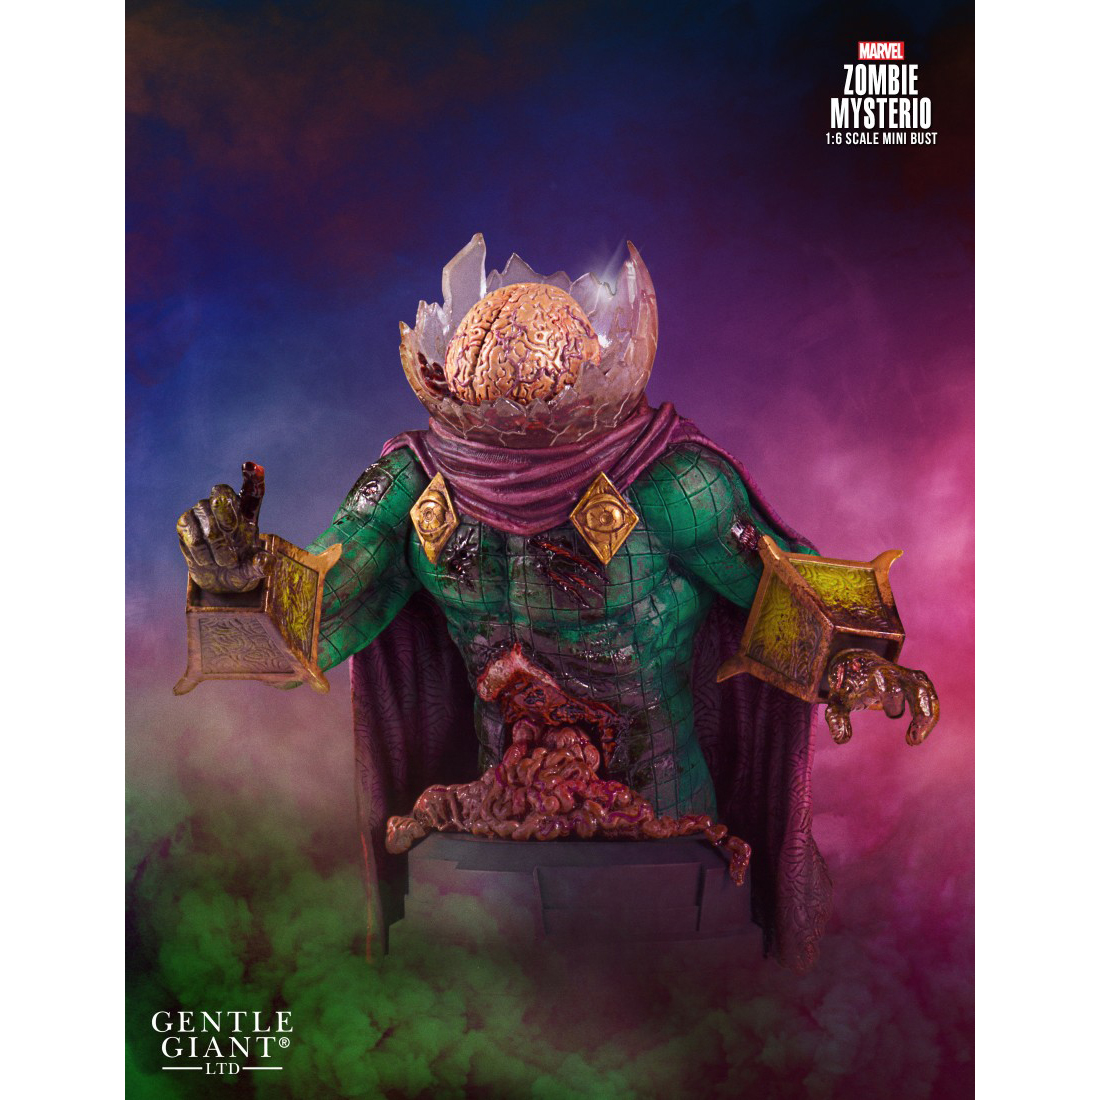 Mysterio Zombie Bust from Marvel and Gentle Giant